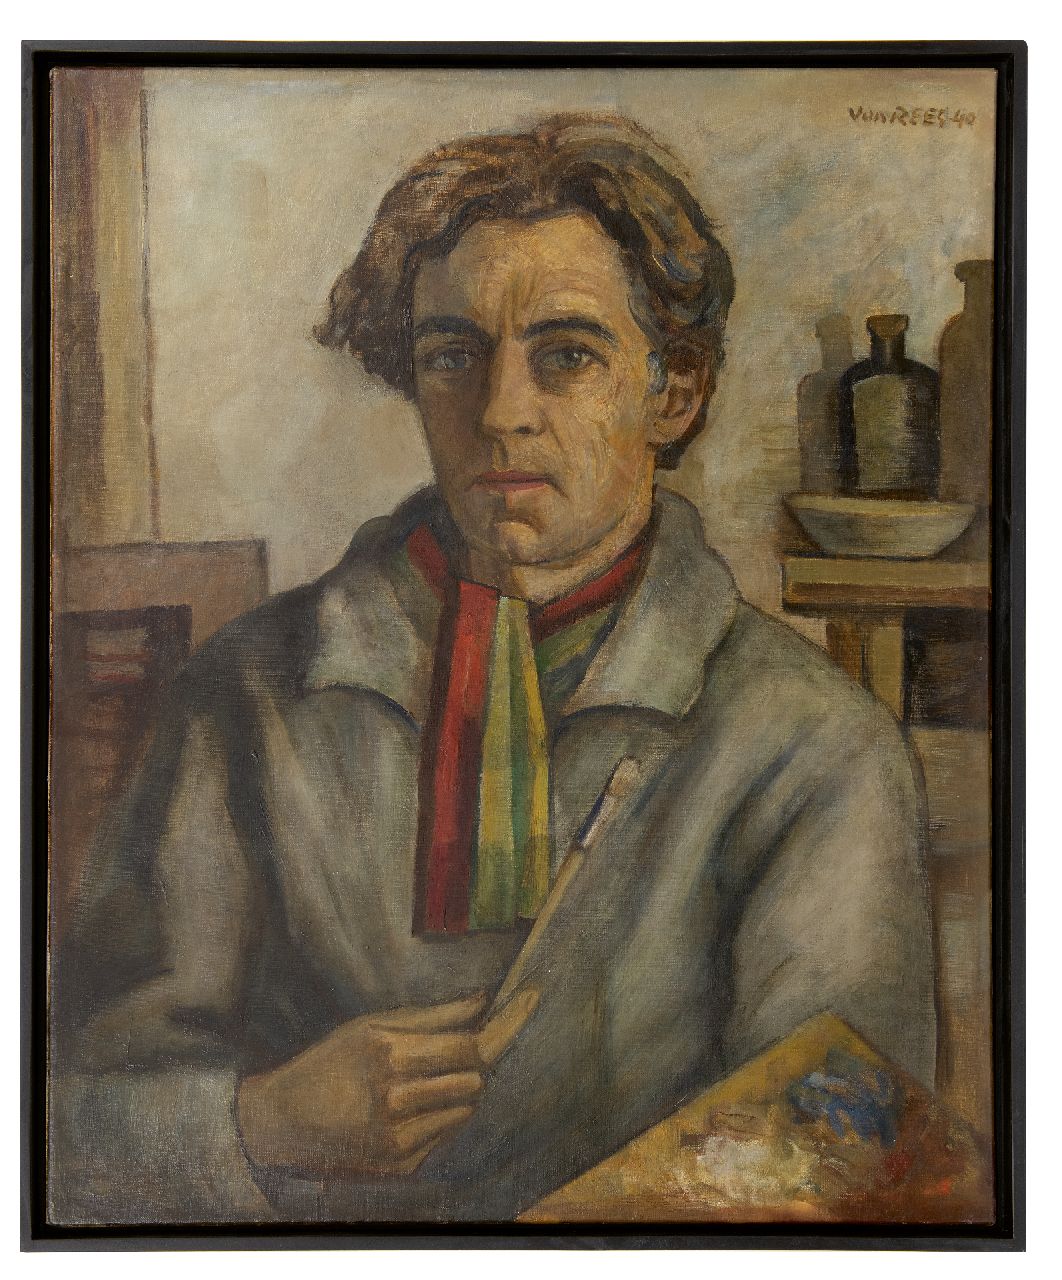 Rees O. van | Otto van Rees | Paintings offered for sale | Self-portrait with palette, oil on canvas 75.2 x 60.0 cm, signed u.r. (twice) and dated '40